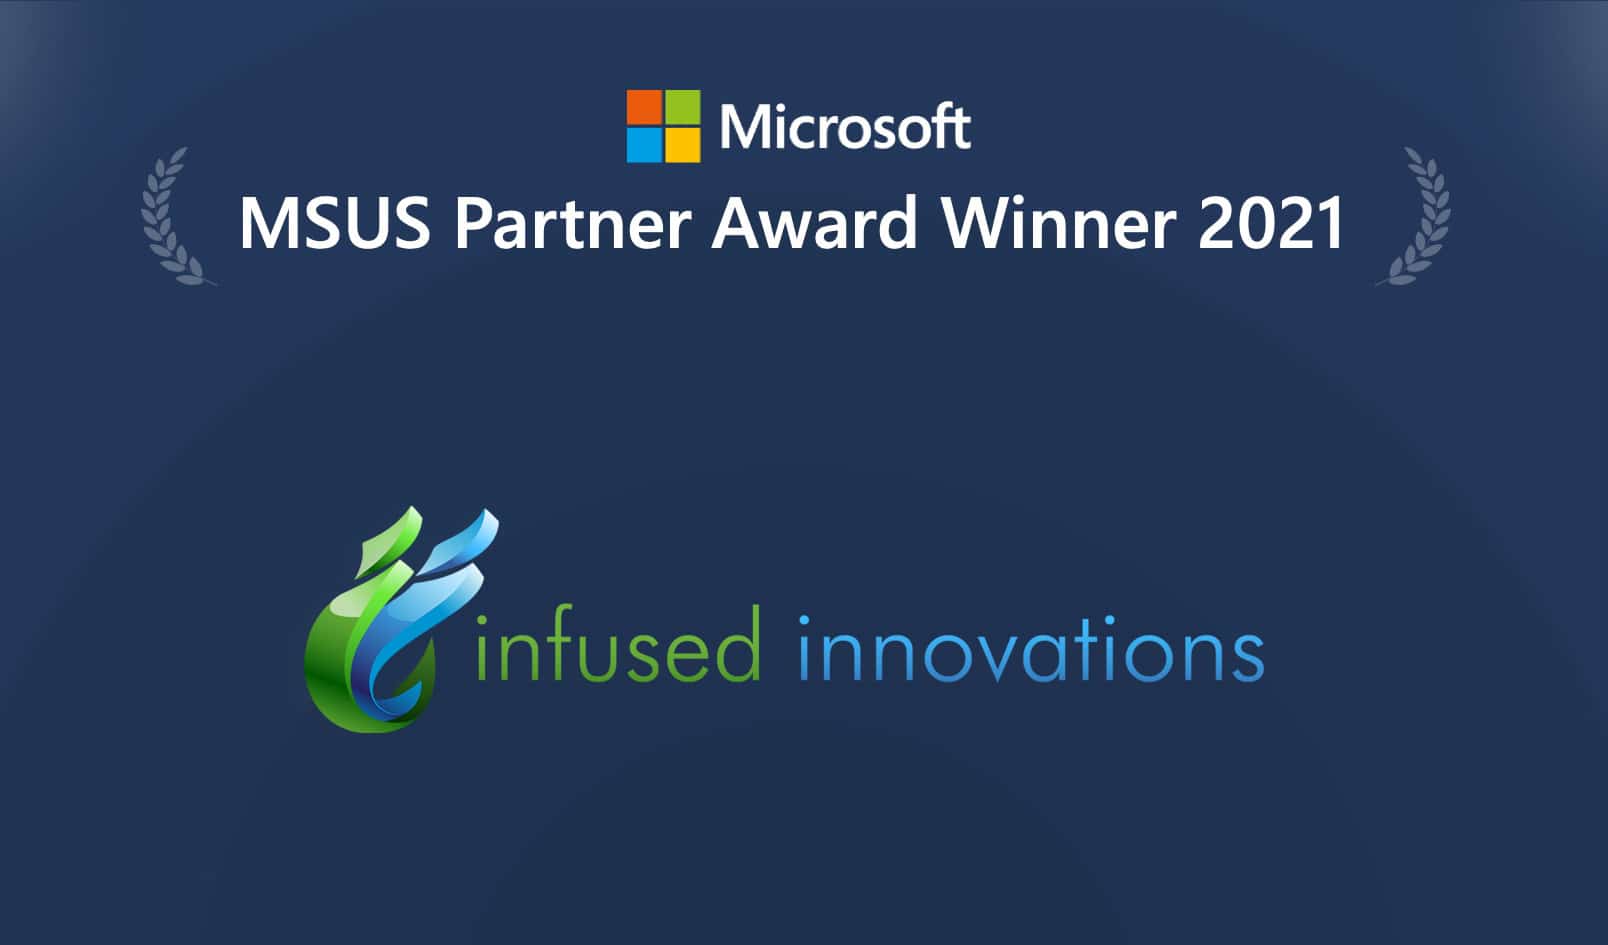 Image shows the Microsoft US Partner Award Winner for 2021: Infused Innovations.